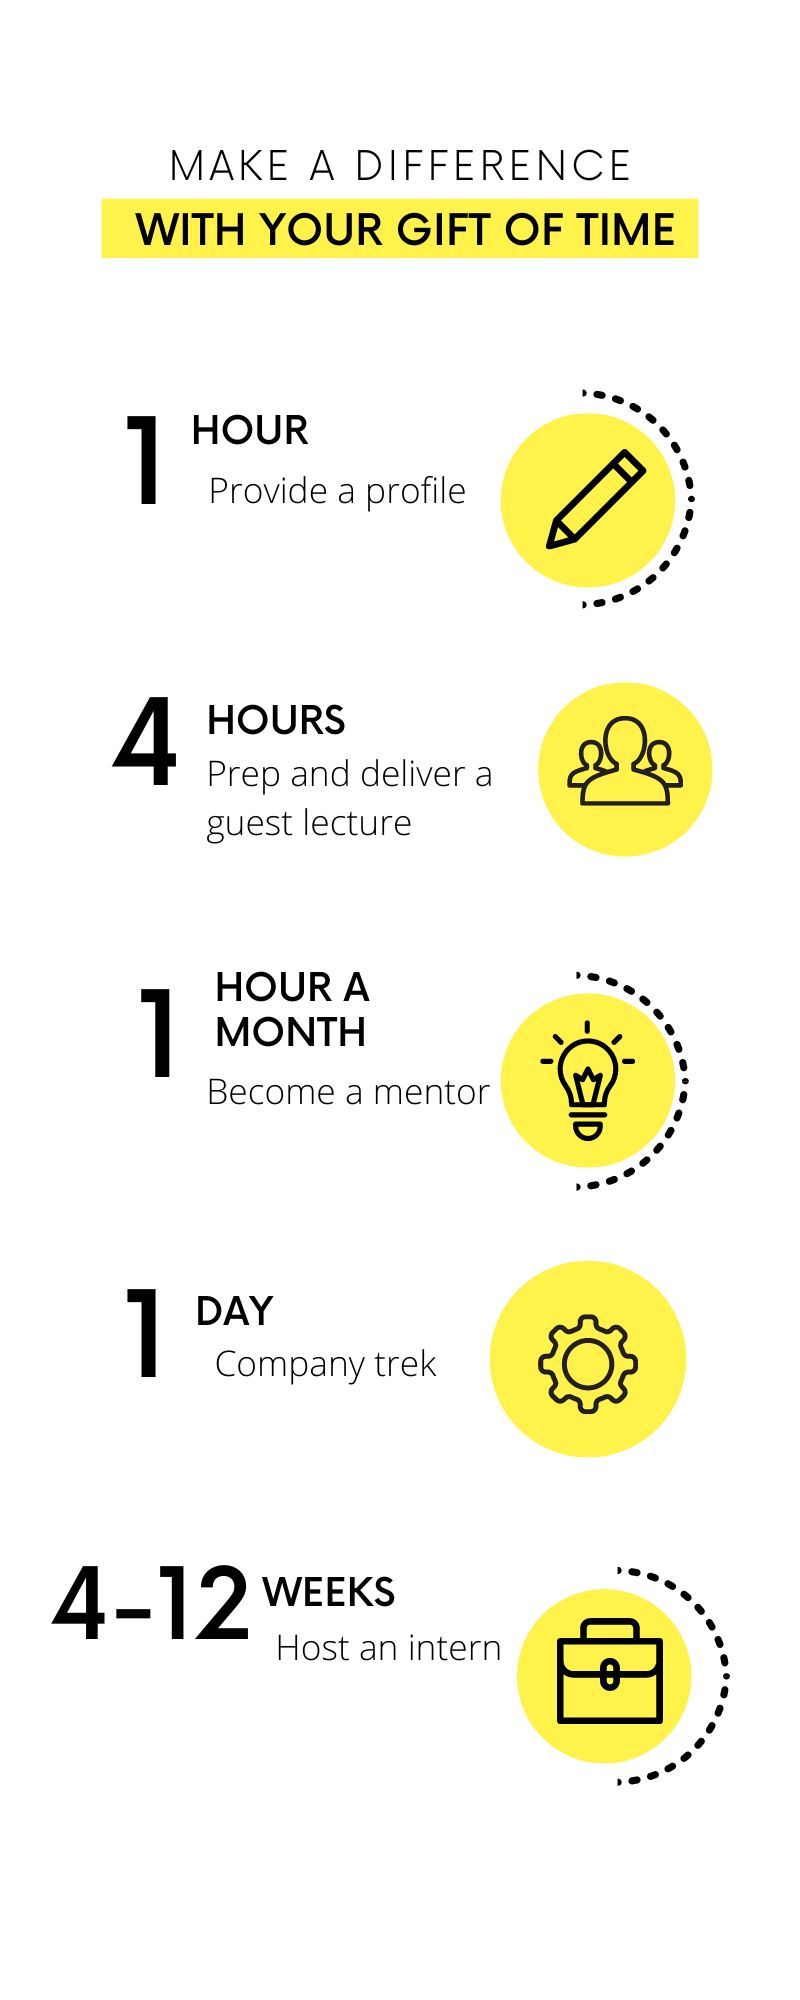 Make a difference with your gift of time, 1 hour provide a profile, 4 hours prep and deliver a guest lecture, 1 hour a month become a mentor, 1 day company trek and 4-12 weeks host an intern